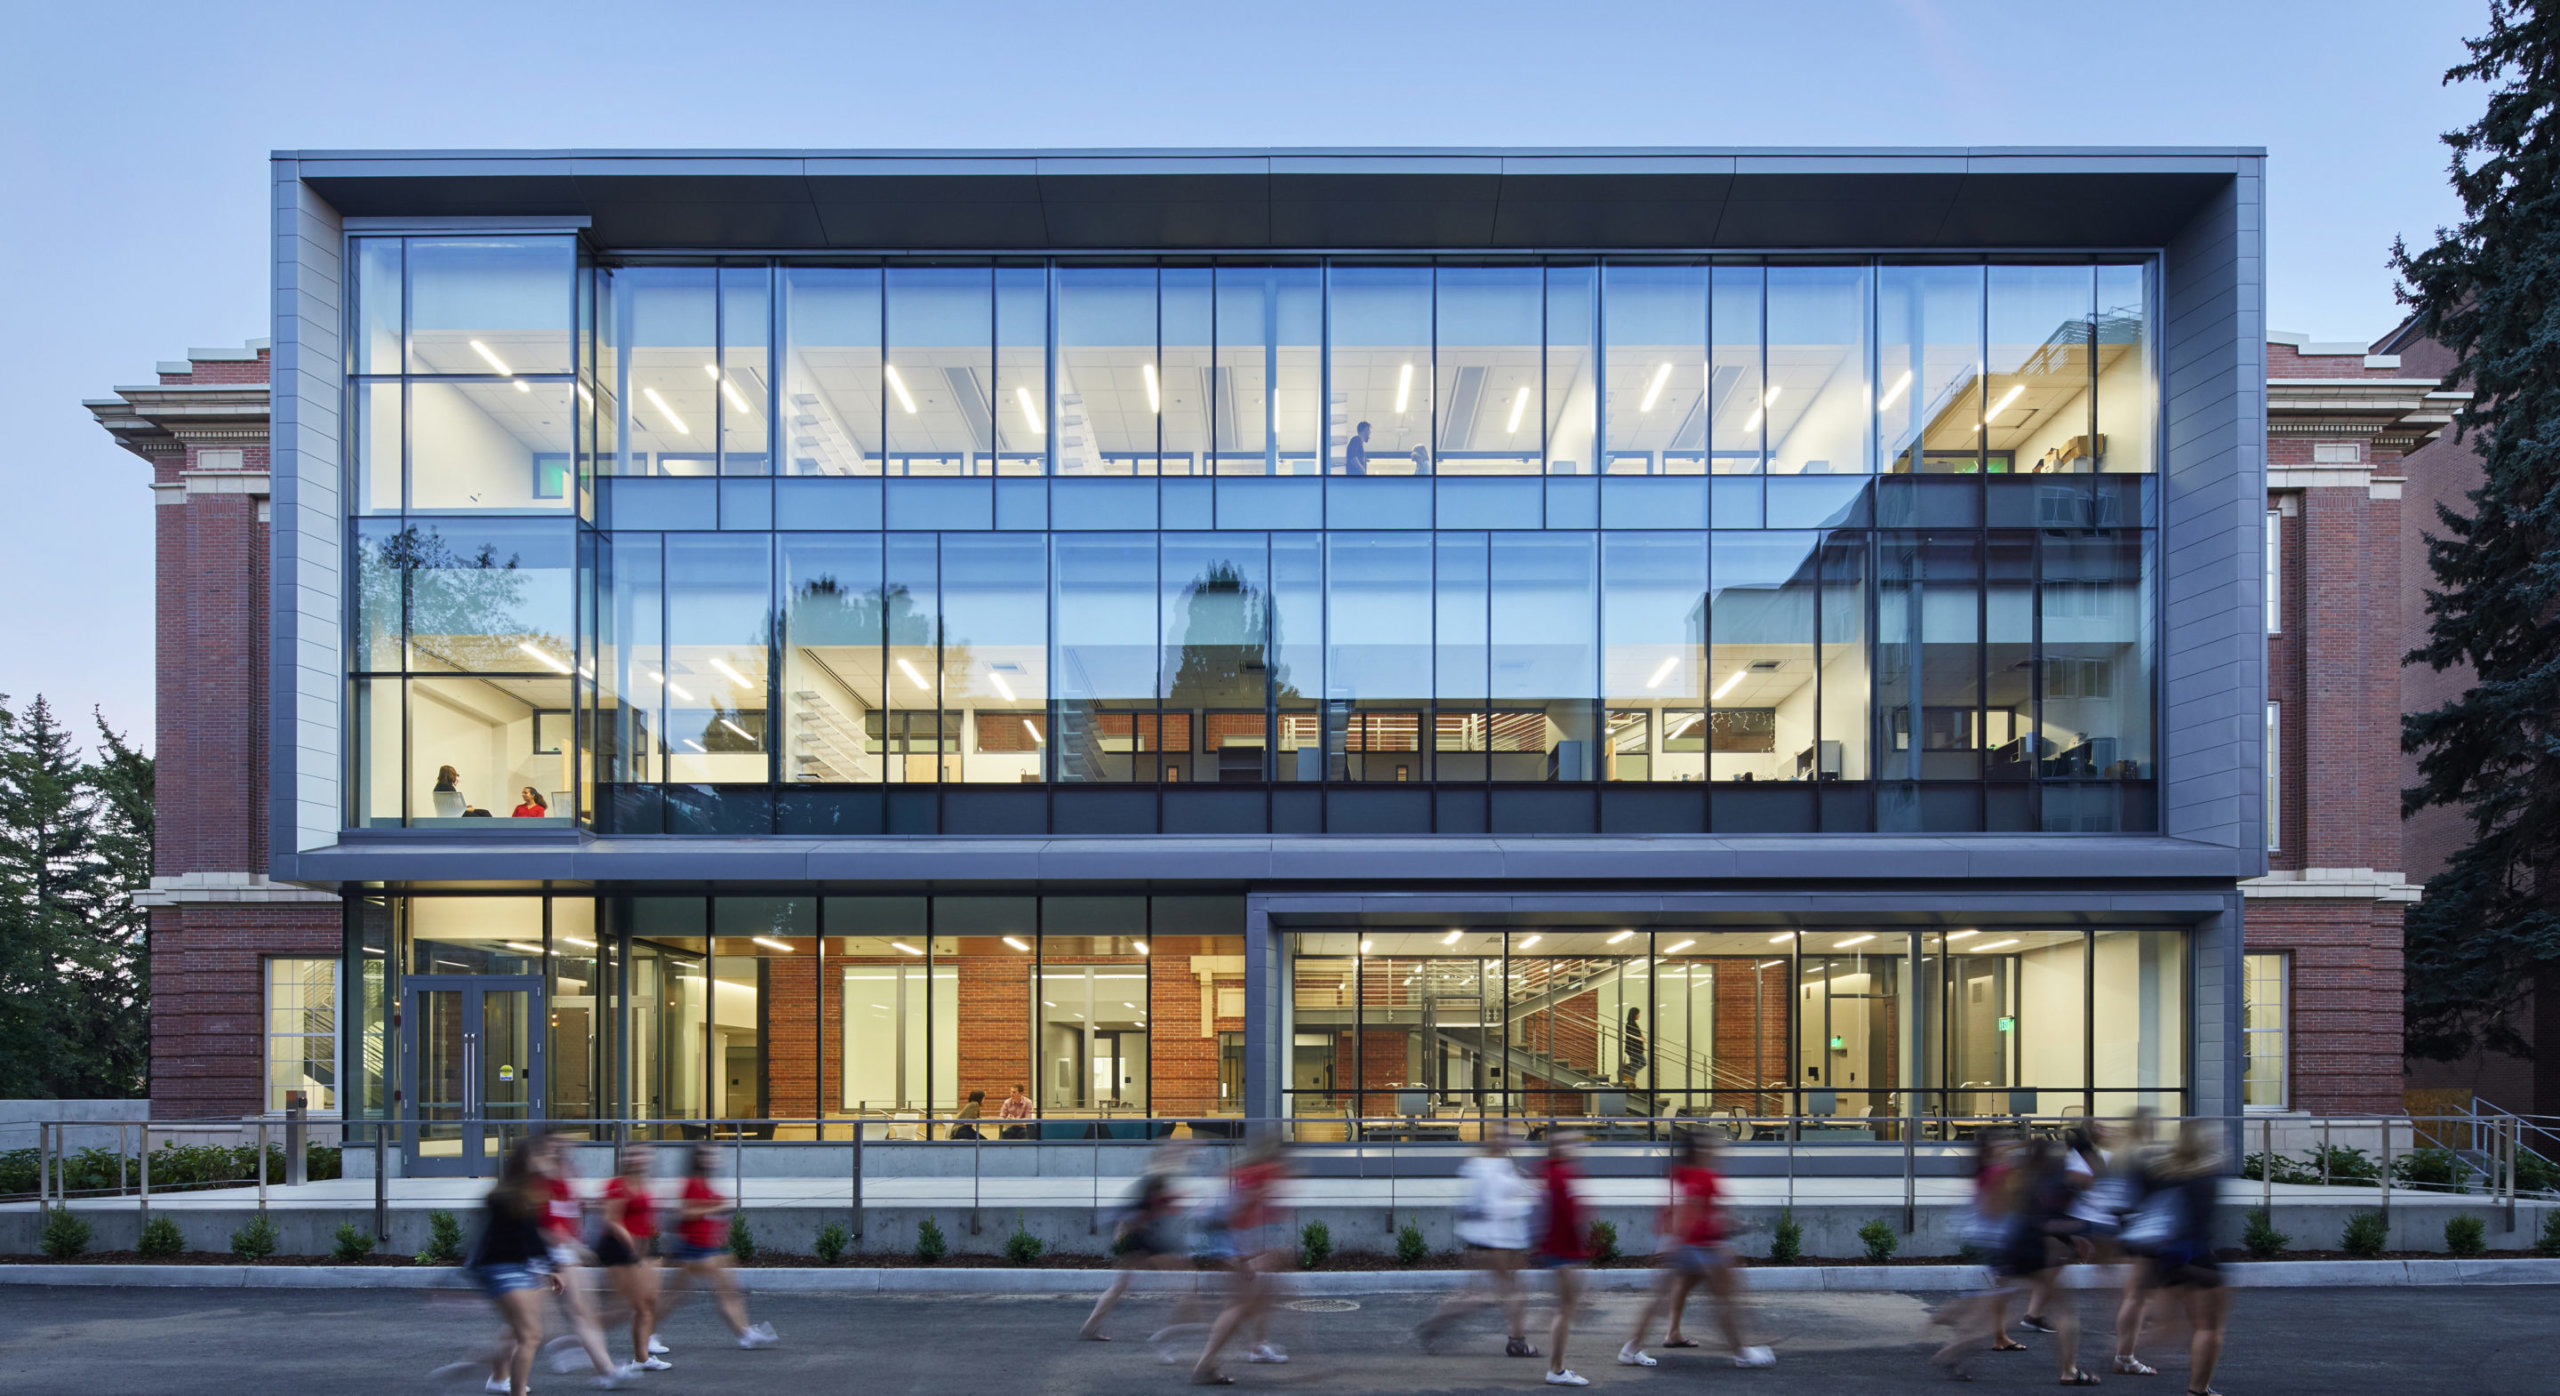 North facade of WSU Troy Hall with glass box atrium and students walking by in the foreground.